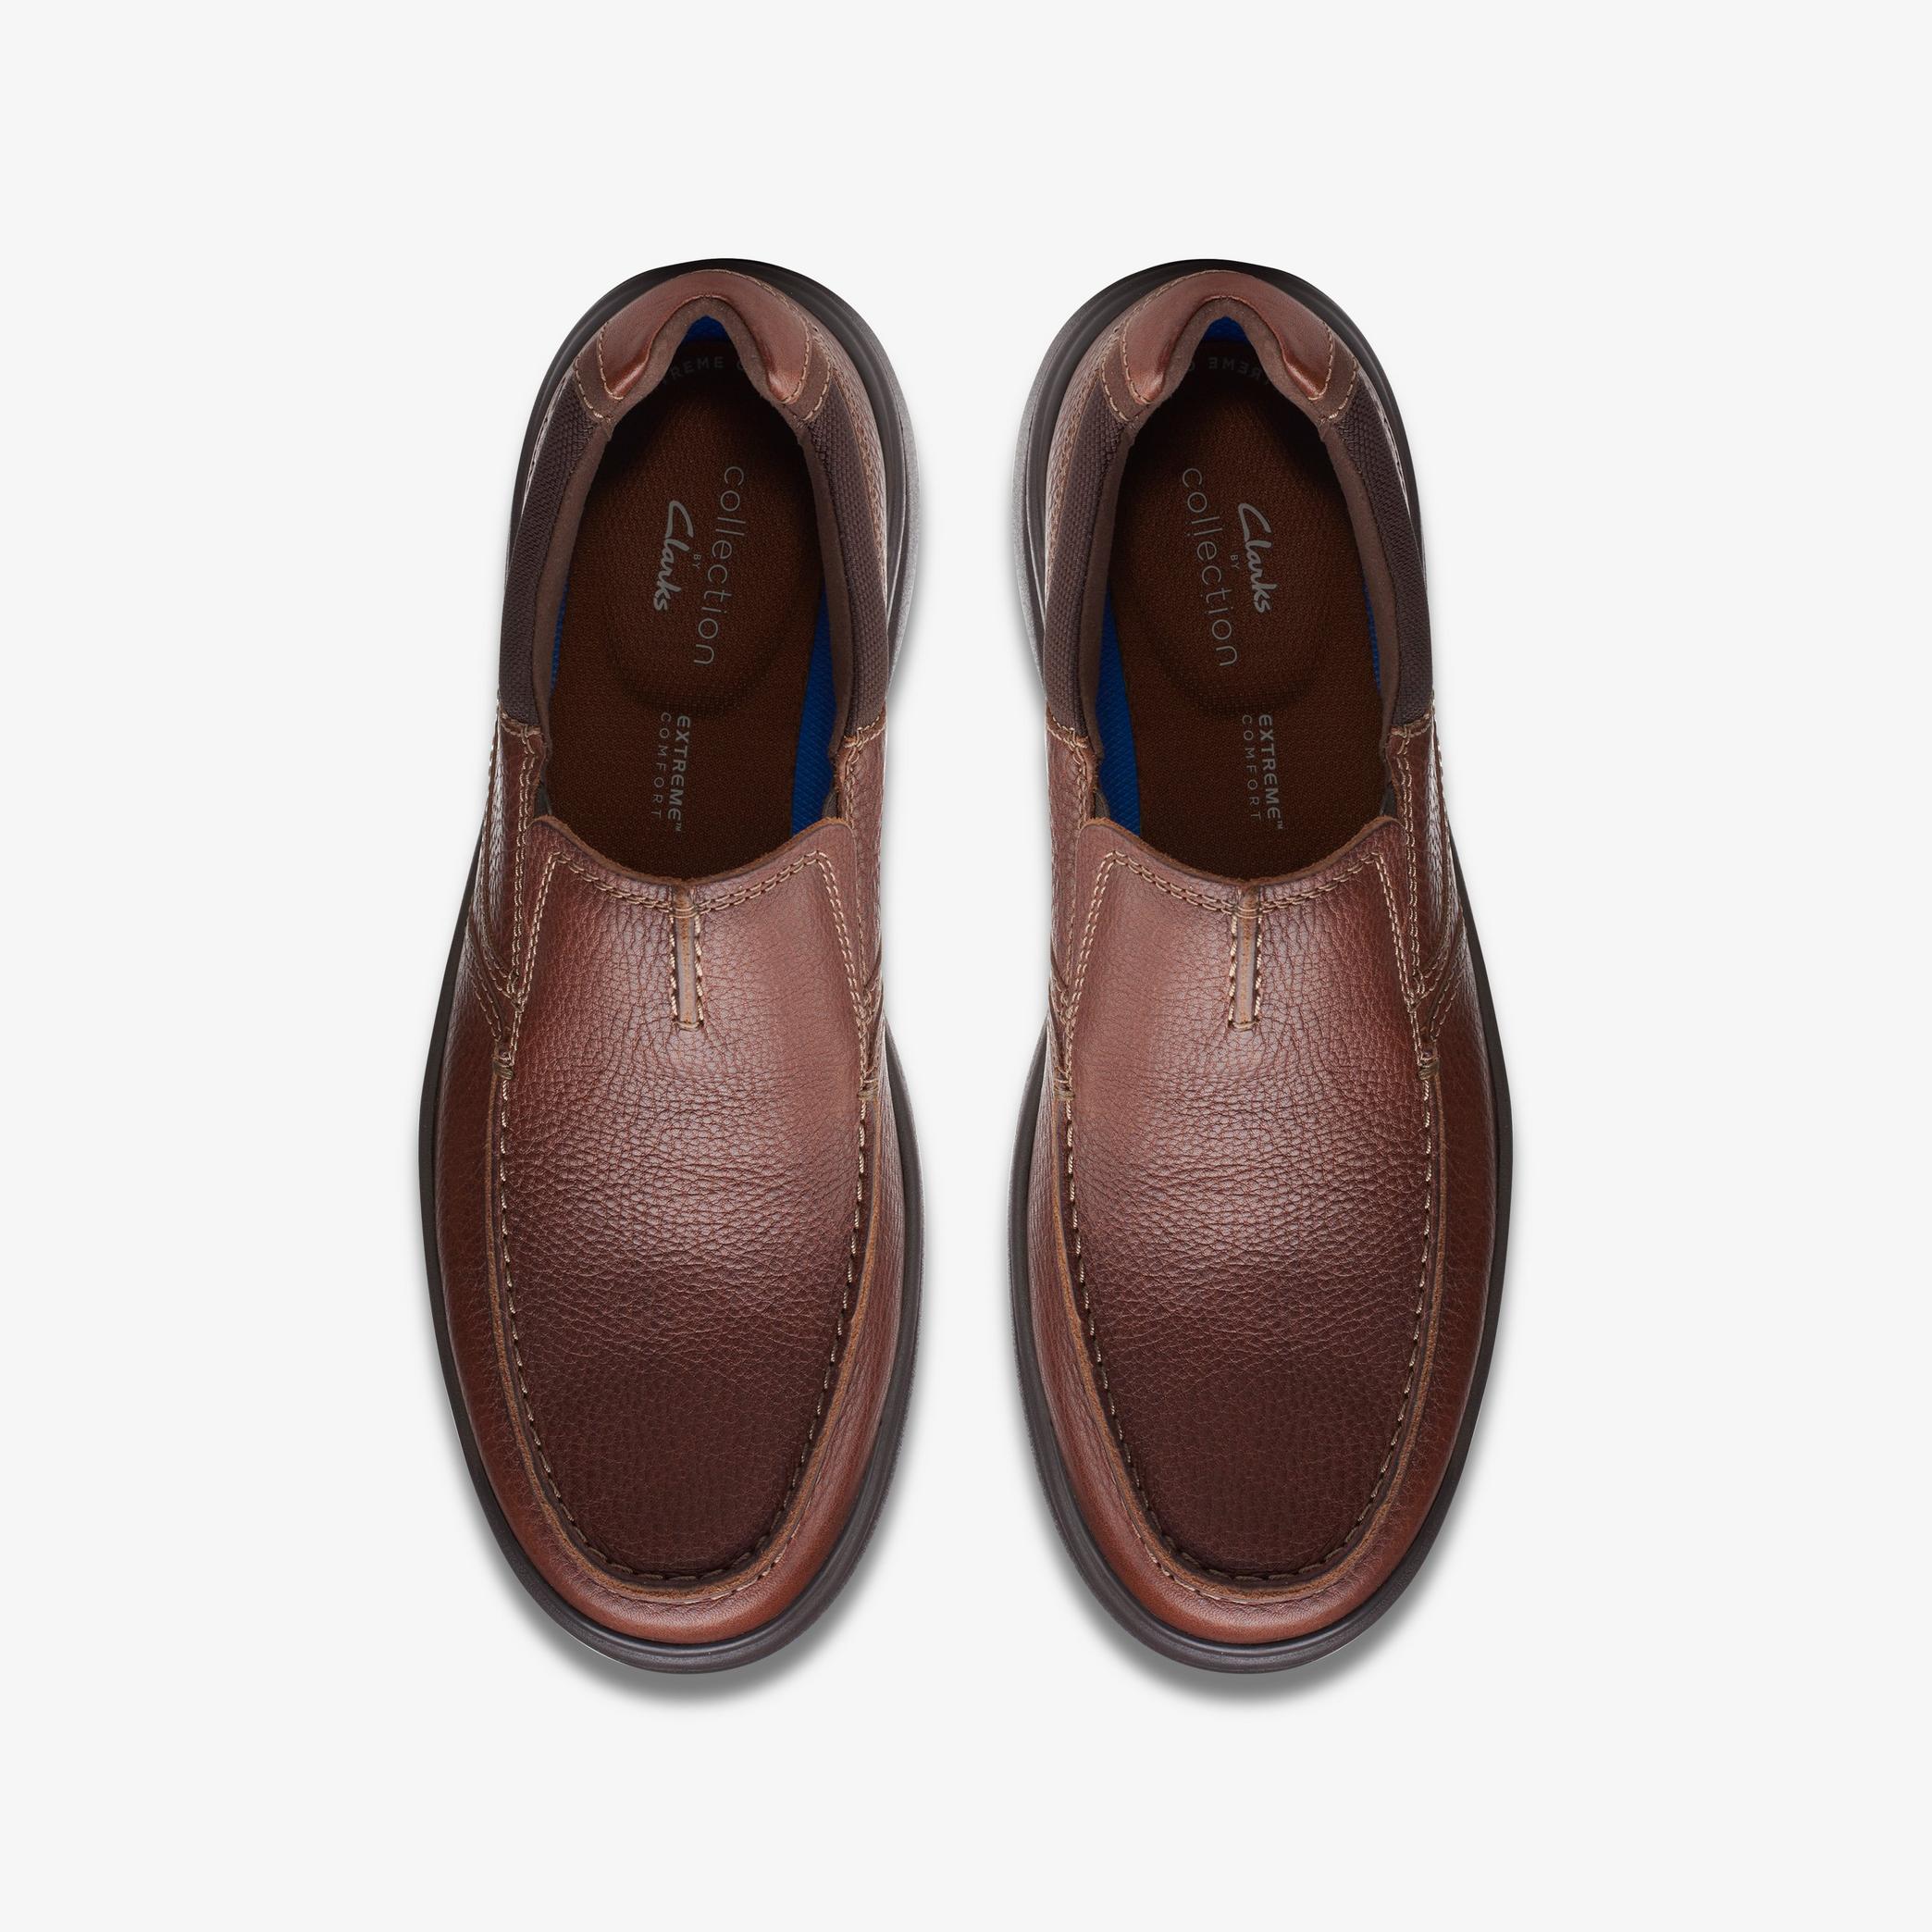 Bradley Free Tan Tumbled Loafers, view 6 of 6